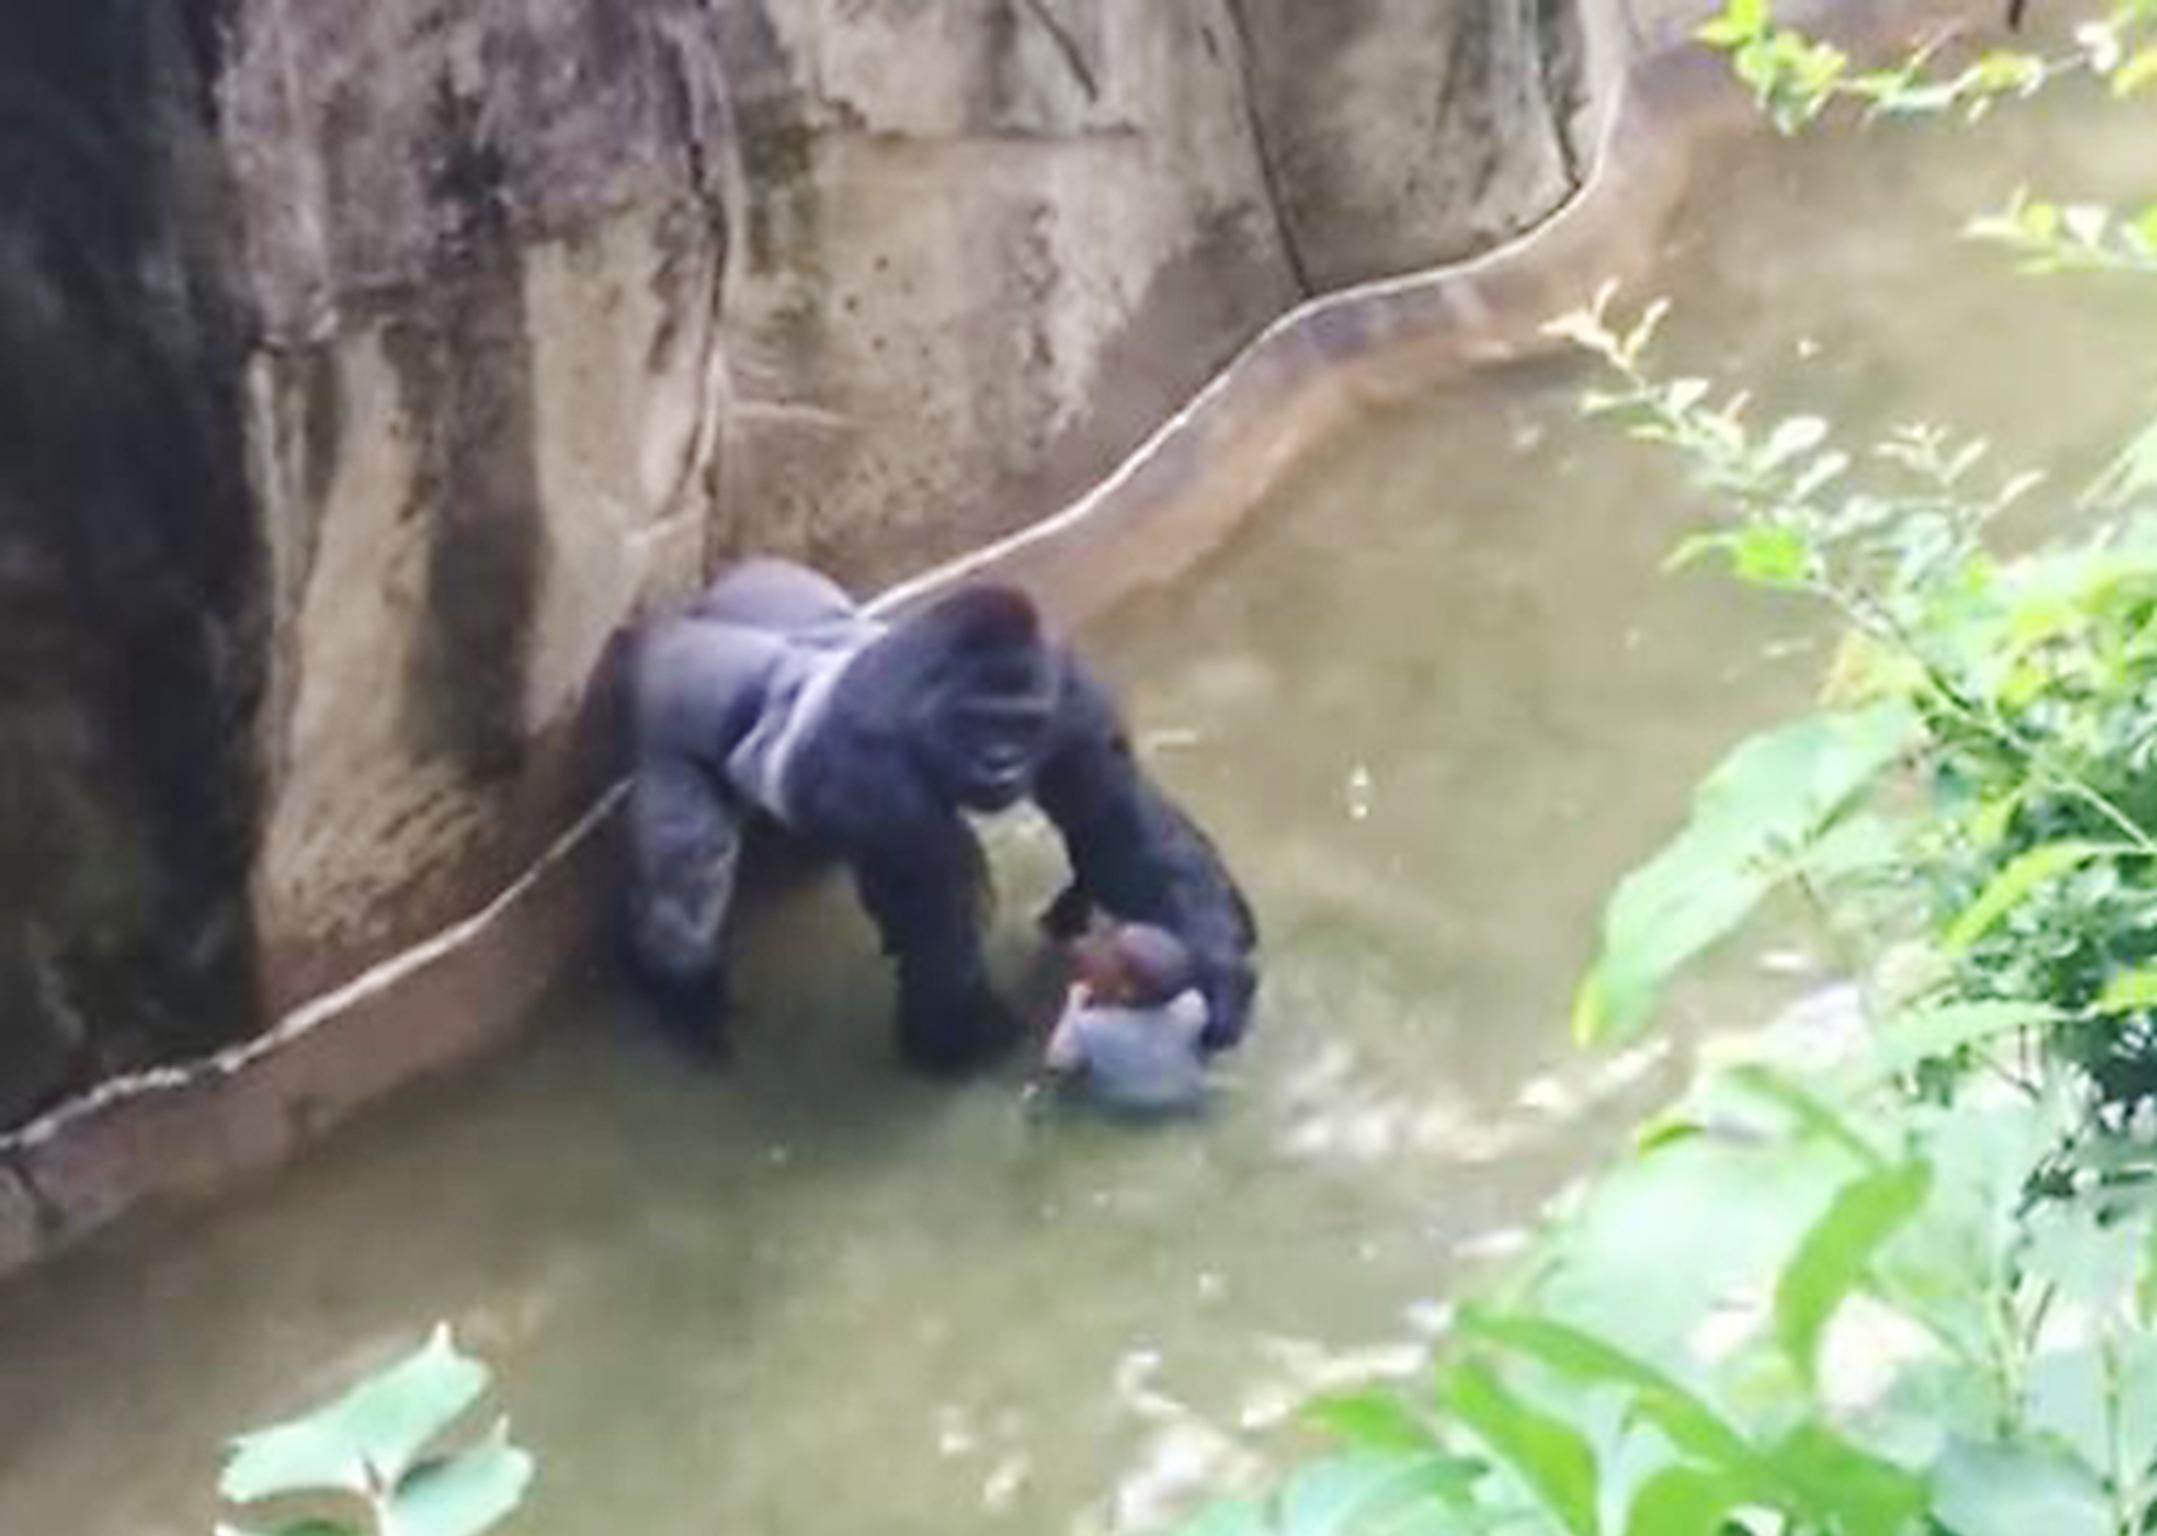 Harambe the gorilla with the child that fell into his enclosure